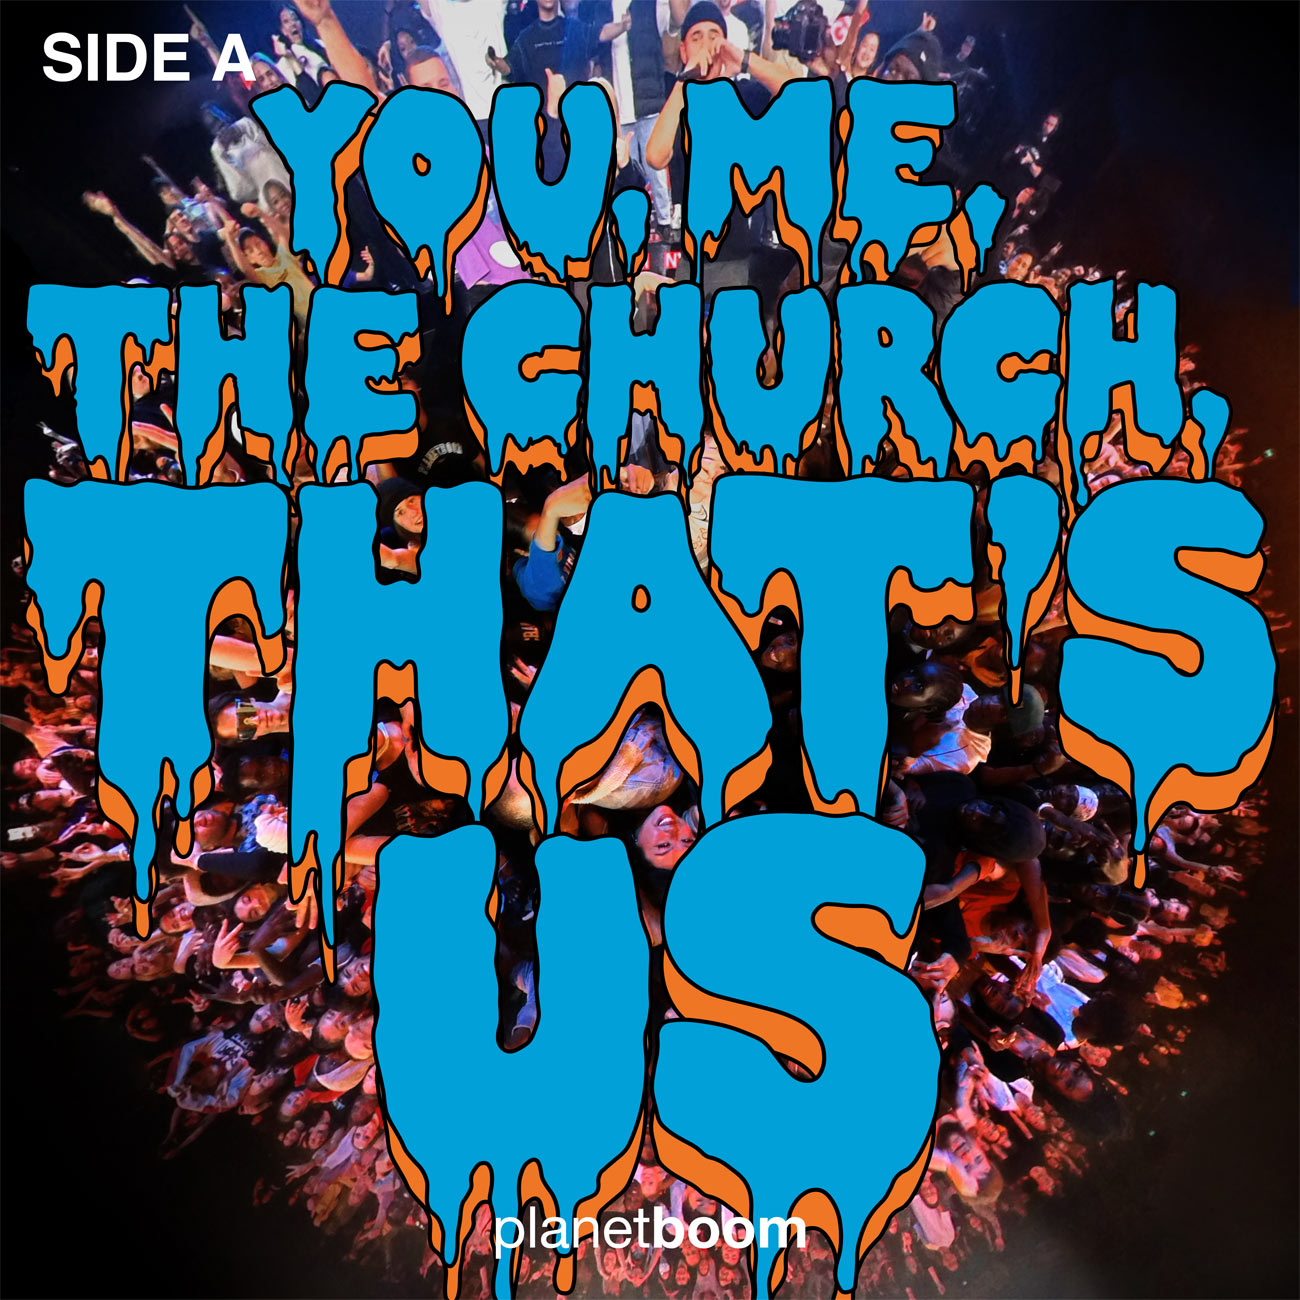  planetboom, You, Me, The Church, That's Us - Side  A Review